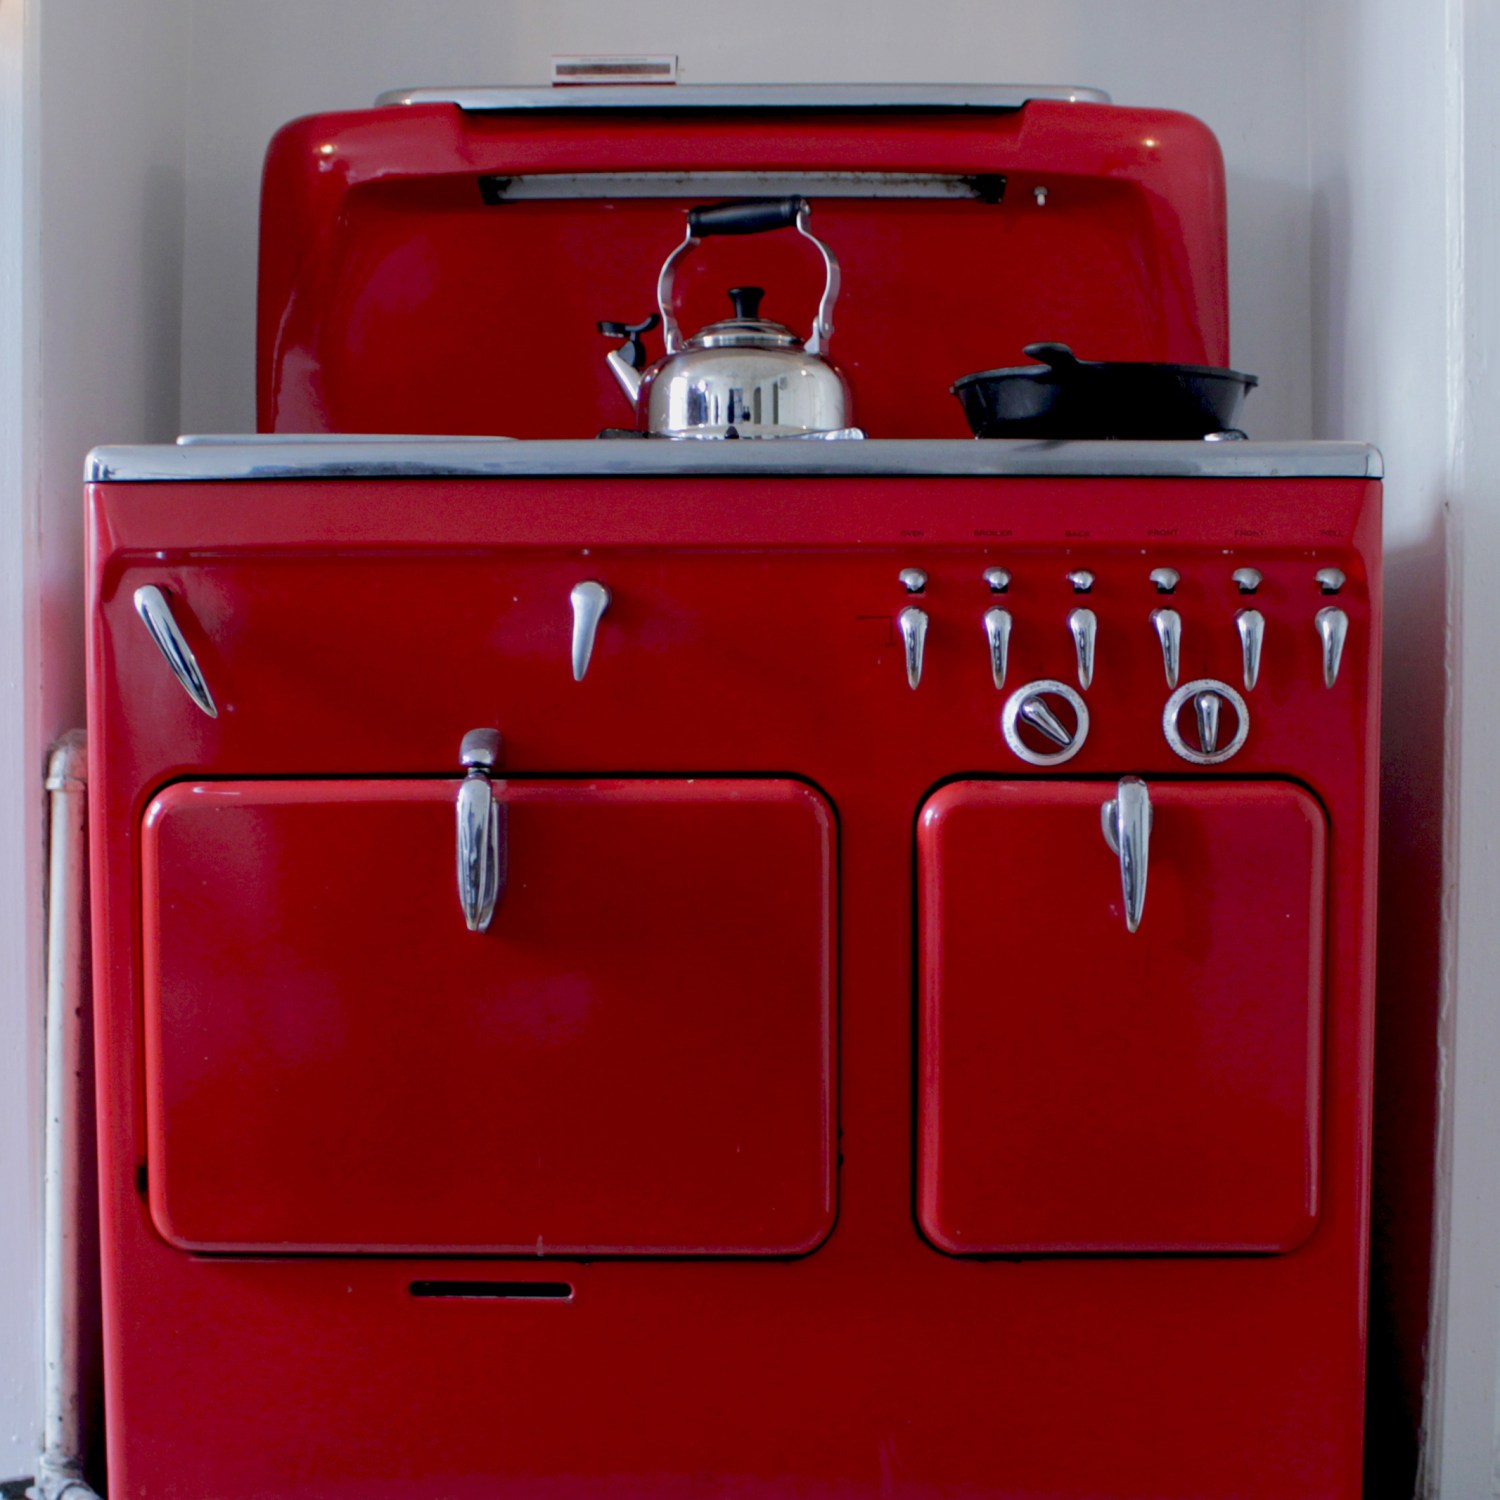 Red vintage stove in a home kitchen